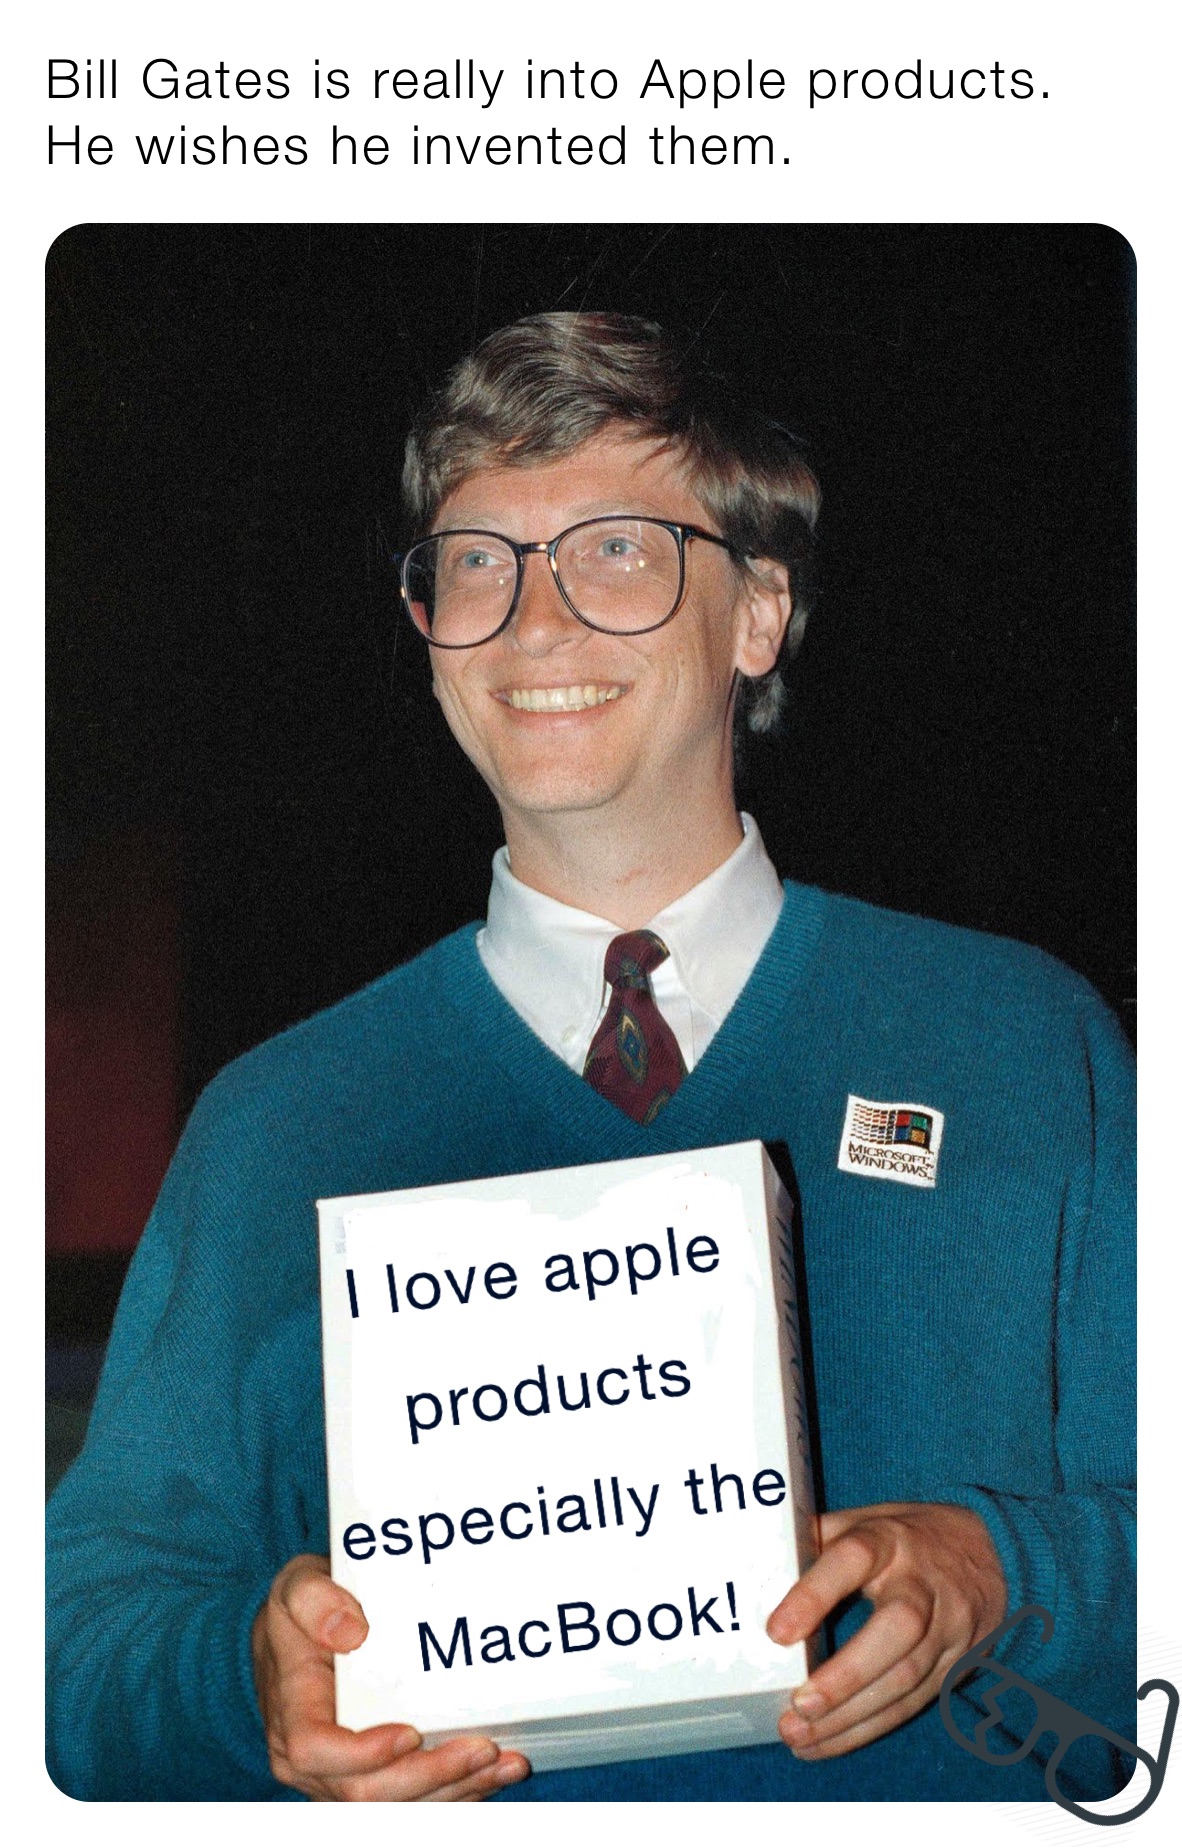 Bill Gates is really into Apple products. He wishes he invented them.